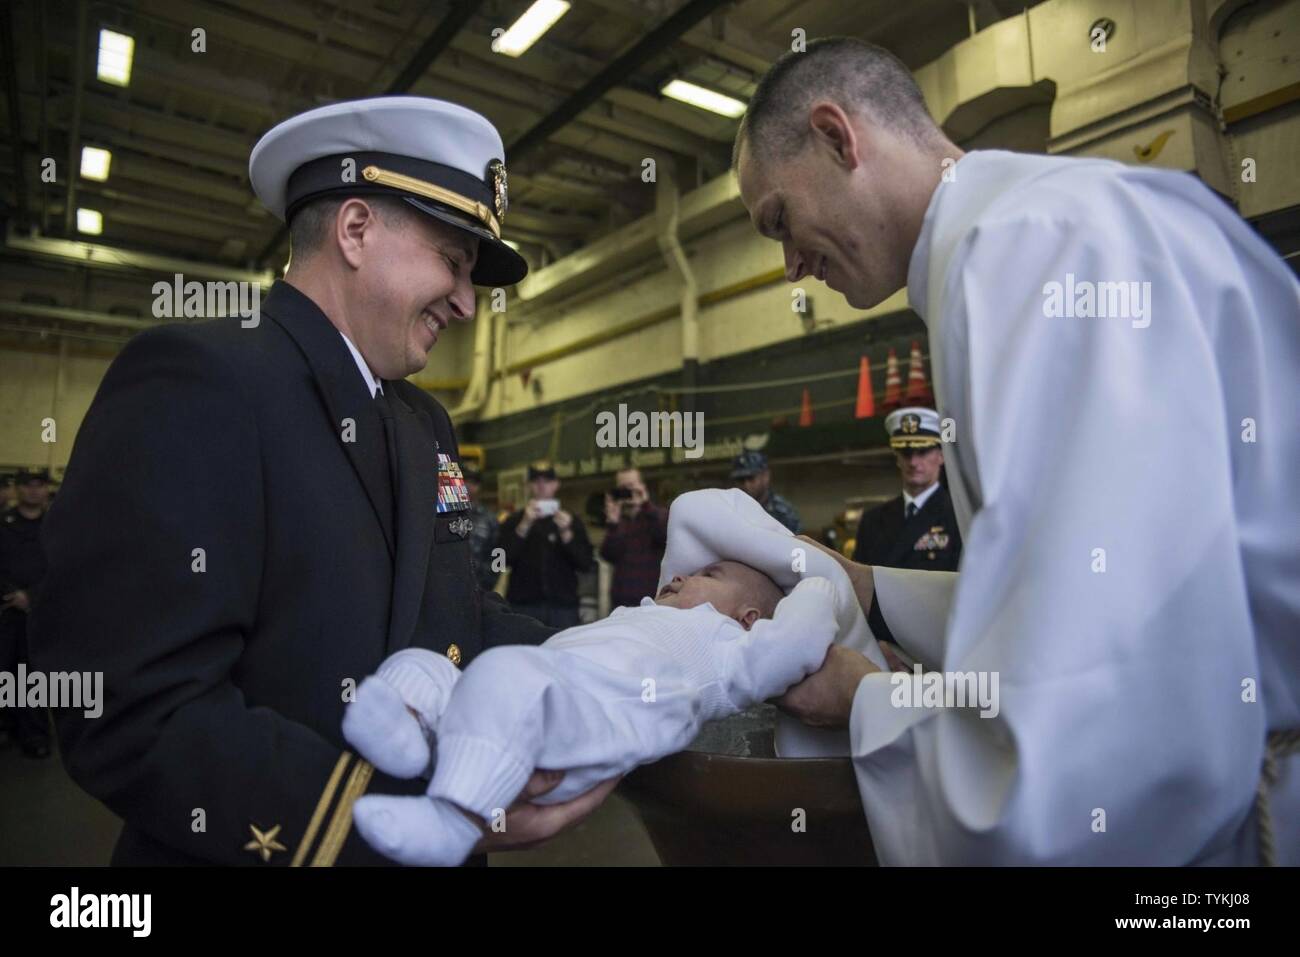 Japan (Nov. 28, 2016) Lt. j.g. Brian Caplan has his son baptized in the bell of the amphibious transport dock ship USS Green Bay (LPD 20). Caplan’s son, Theo, was the first newborn to be baptized inside Green Bay’s bell. Conducting baptisms is a Navy tradition that dates back several hundred years to its origins in the British Royal Navy. Green Bay, forward-deployed to Sasebo, Japan, is serving forward to provide a rapid-response capability in the event of a regional contingency or natural disaster. Stock Photo